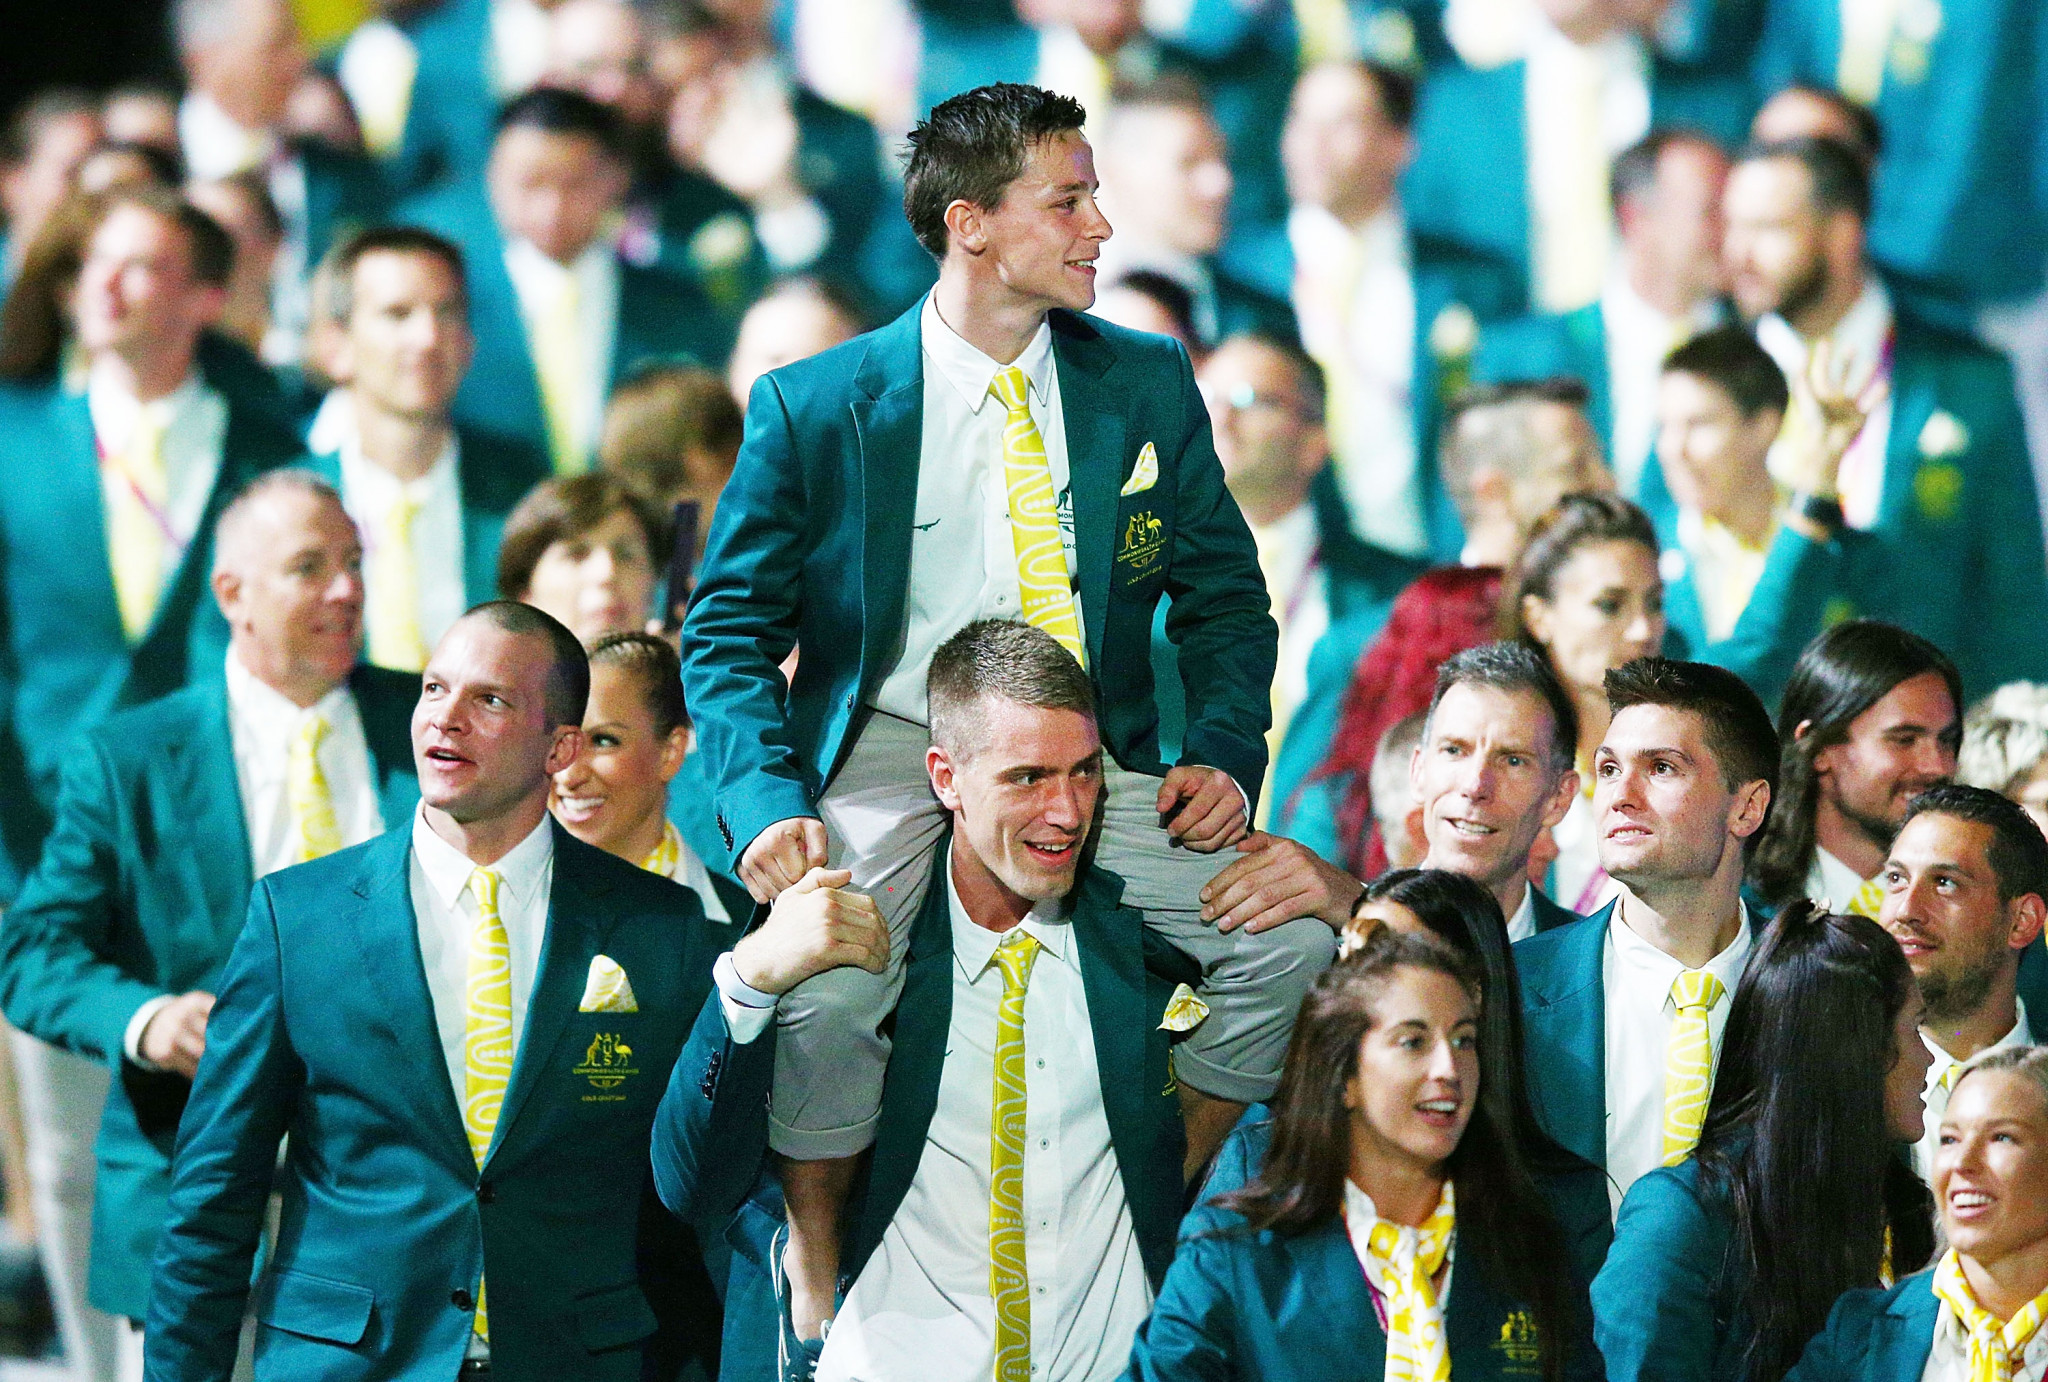 Australian athletes walk around during the Opening Ceremony for the Gold Coast 2018 Commonwealth Games at Carrara Stadium ©Getty Images